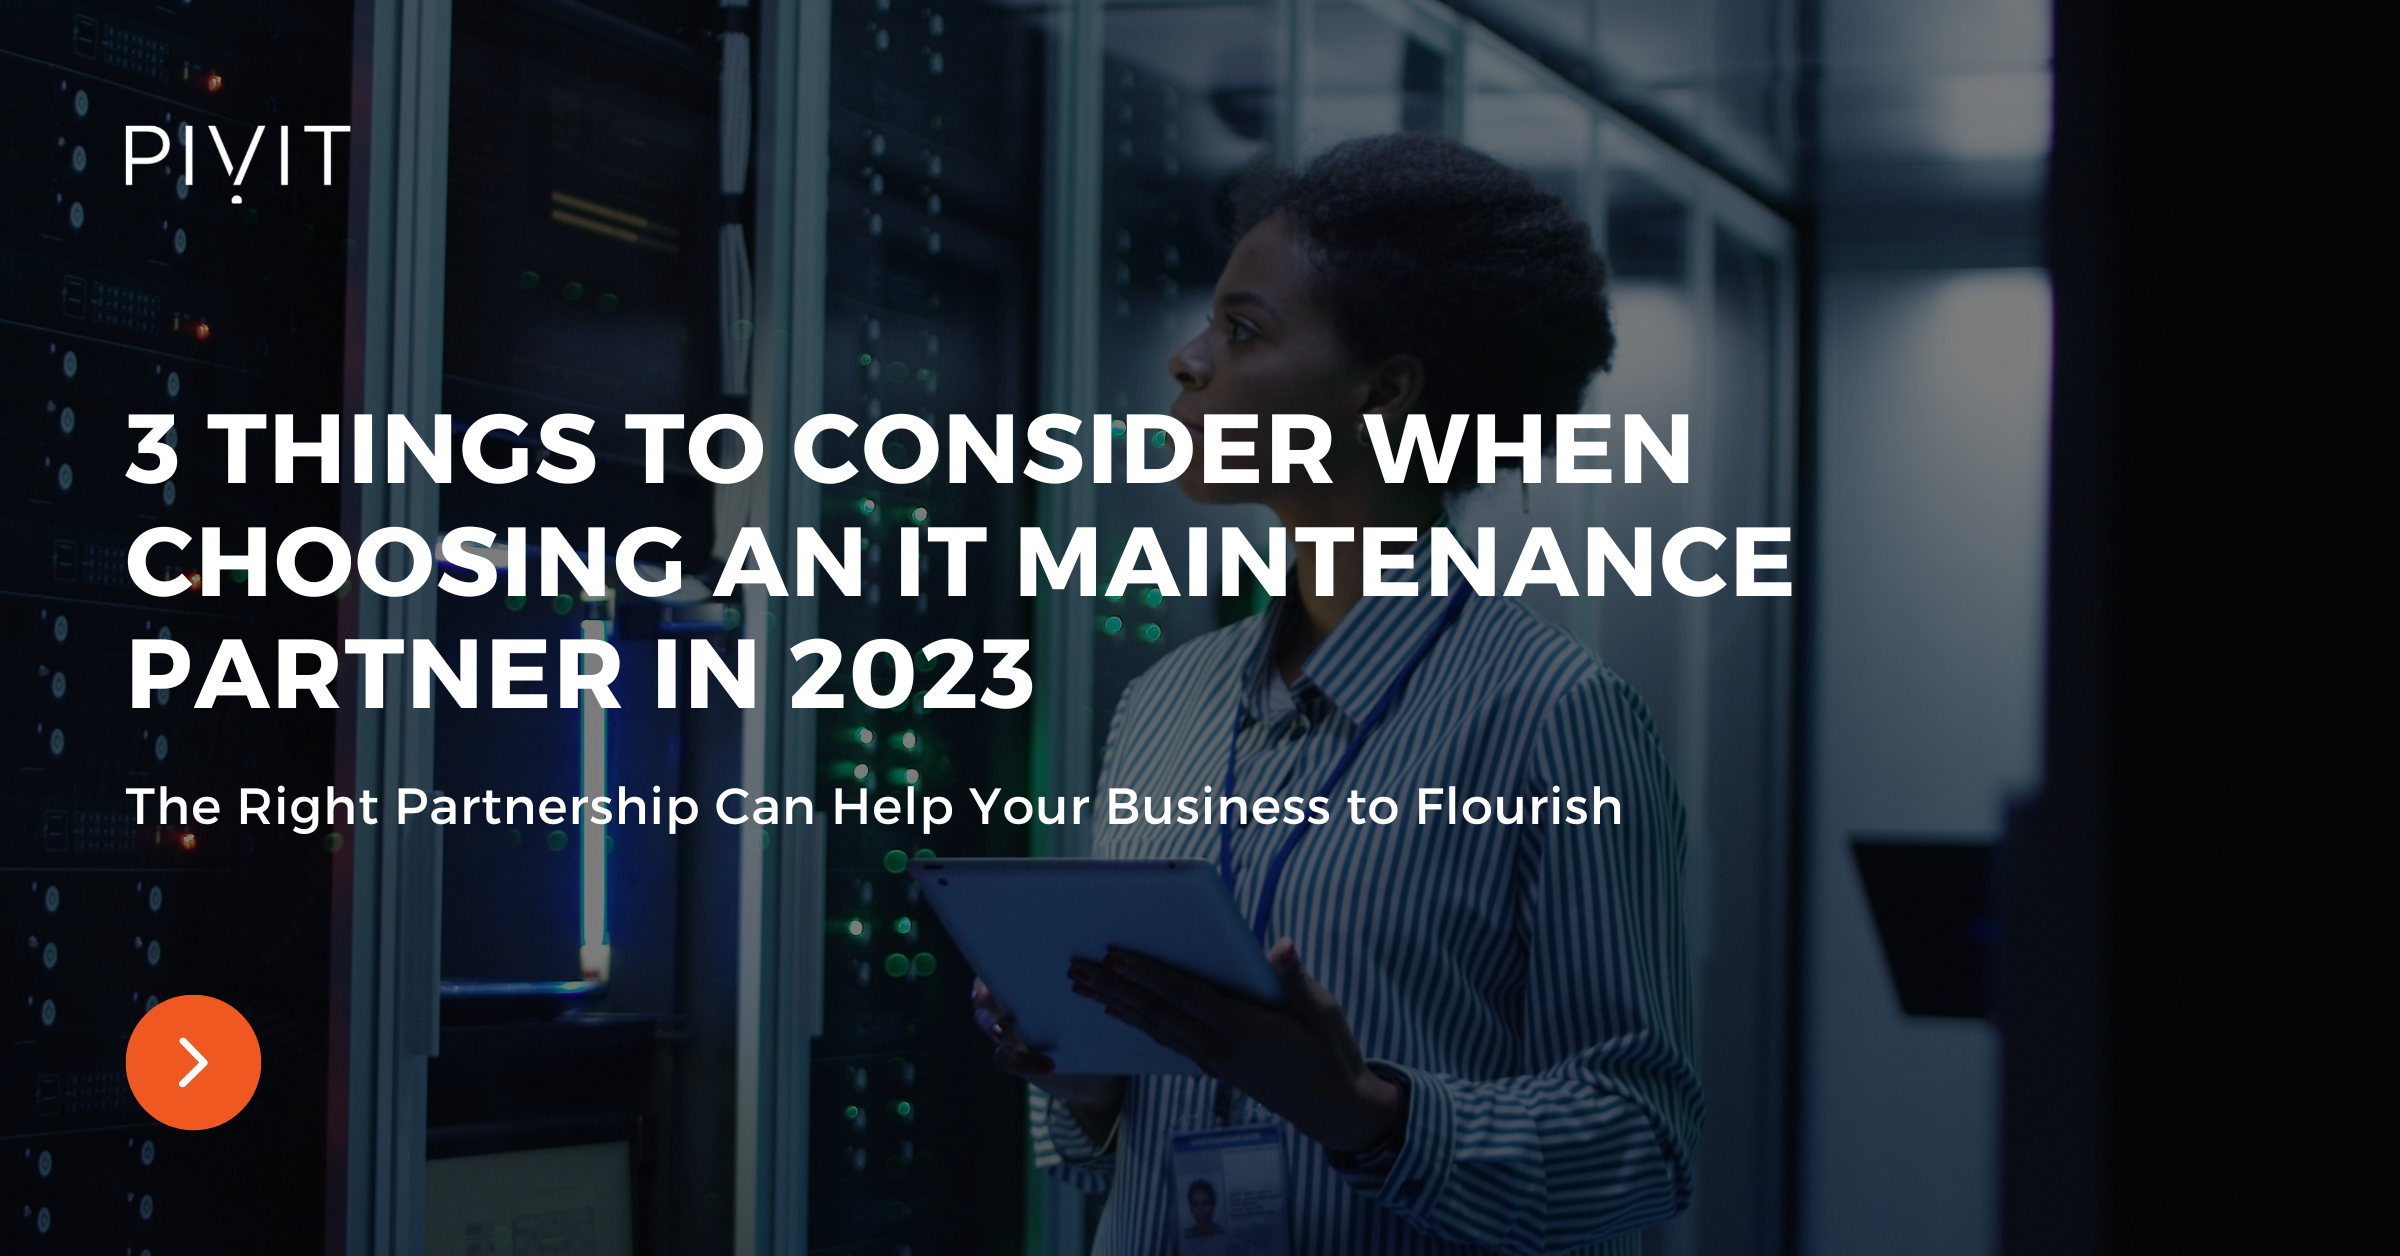 3 Things to Consider When Choosing an IT Maintenance Partner in 2023